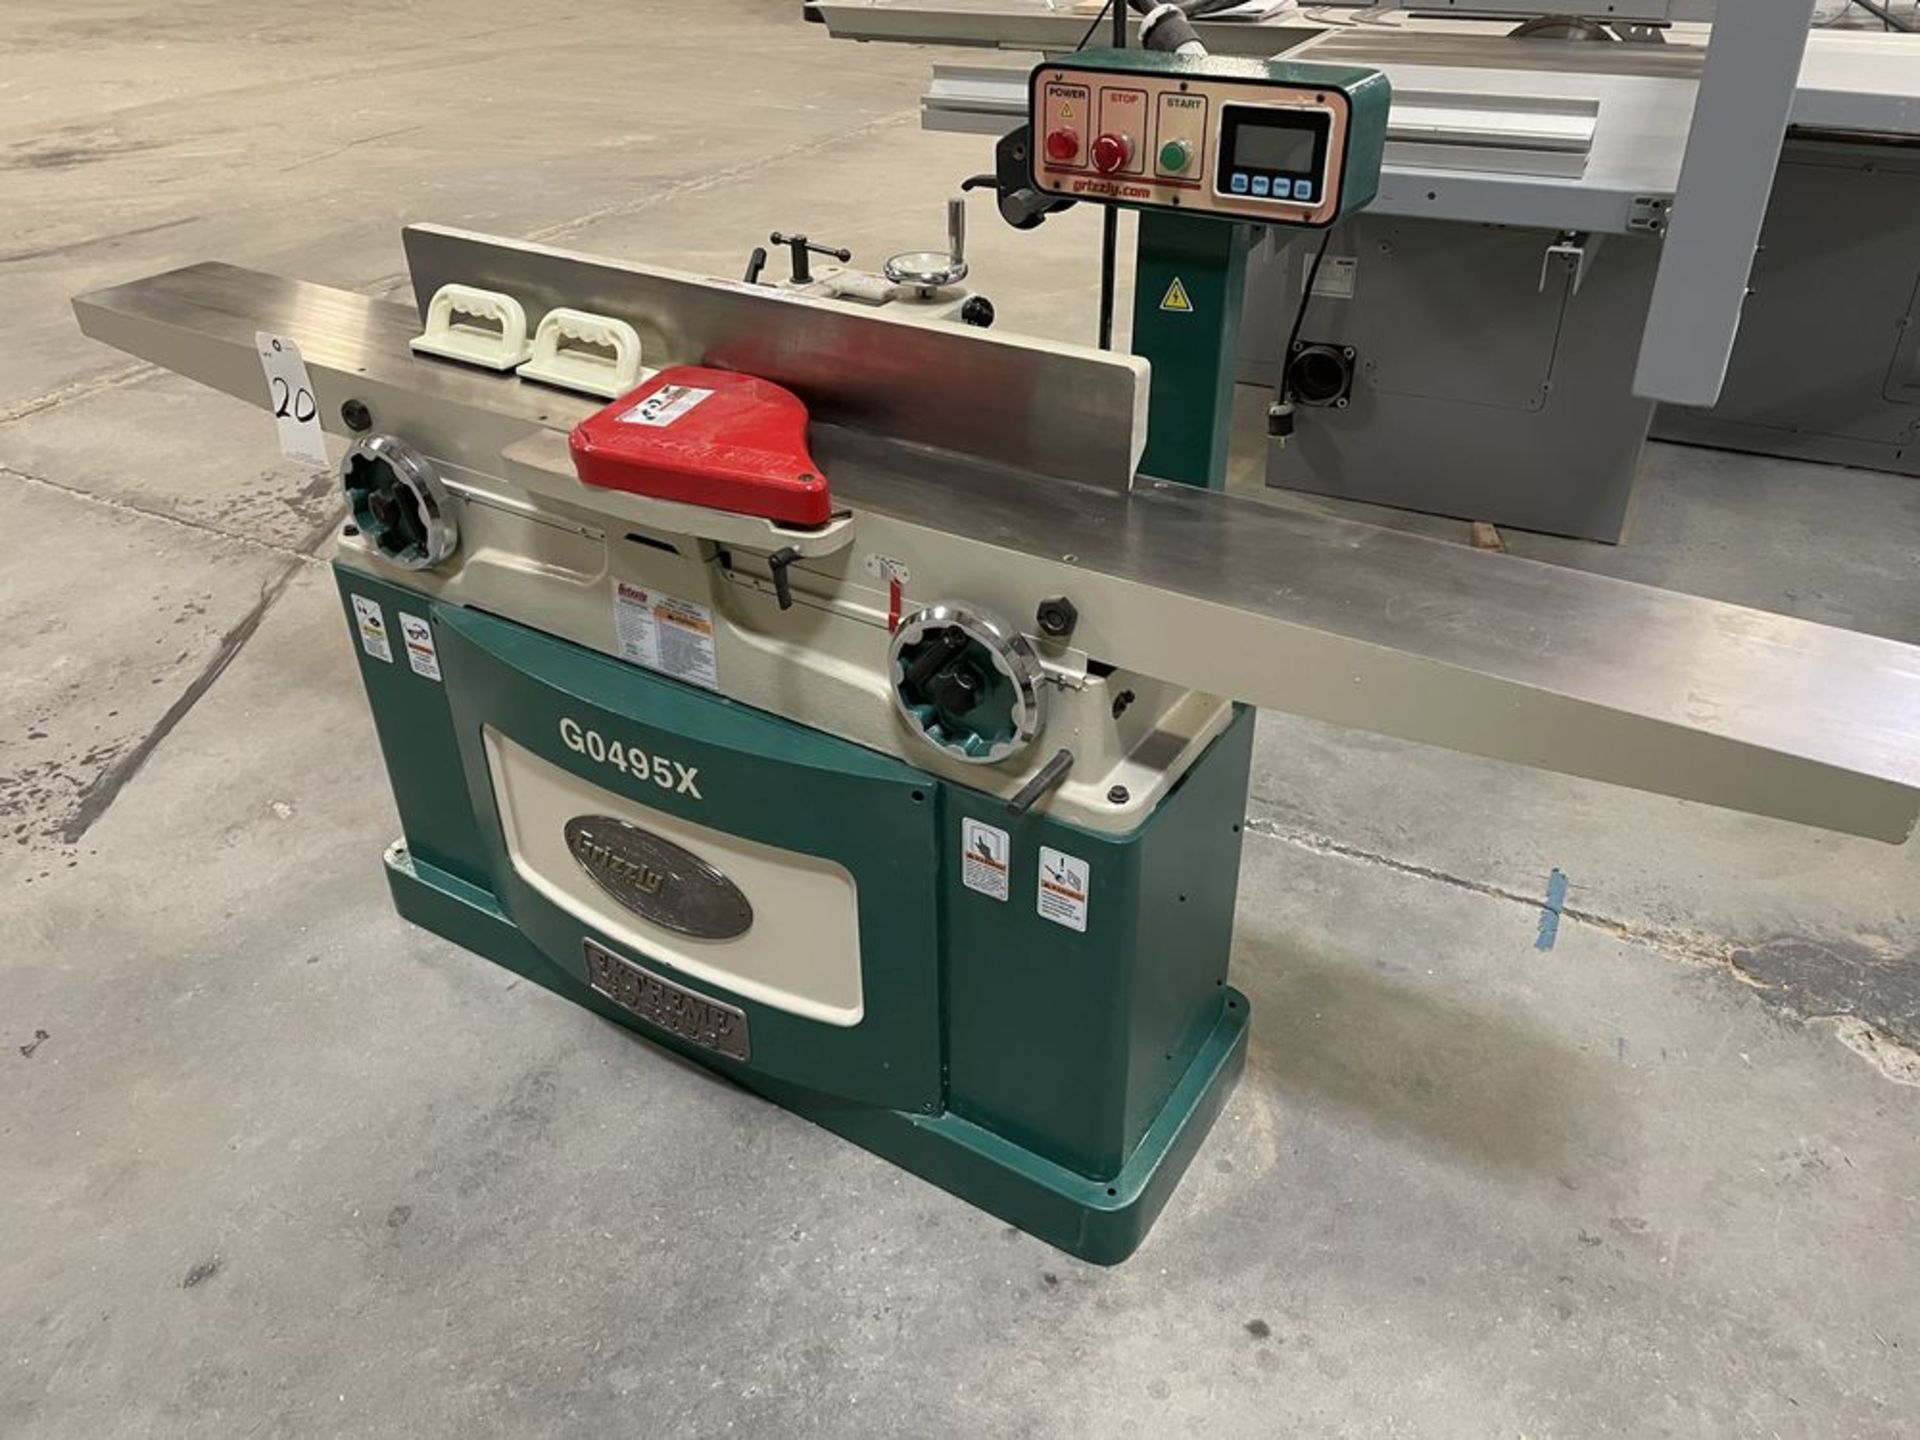 2018 Grizzly G0495X 8" x 83" Helical Cutterhead Jointer w/ DRO. SN 187458, Year 2018. Equipped - Image 2 of 7